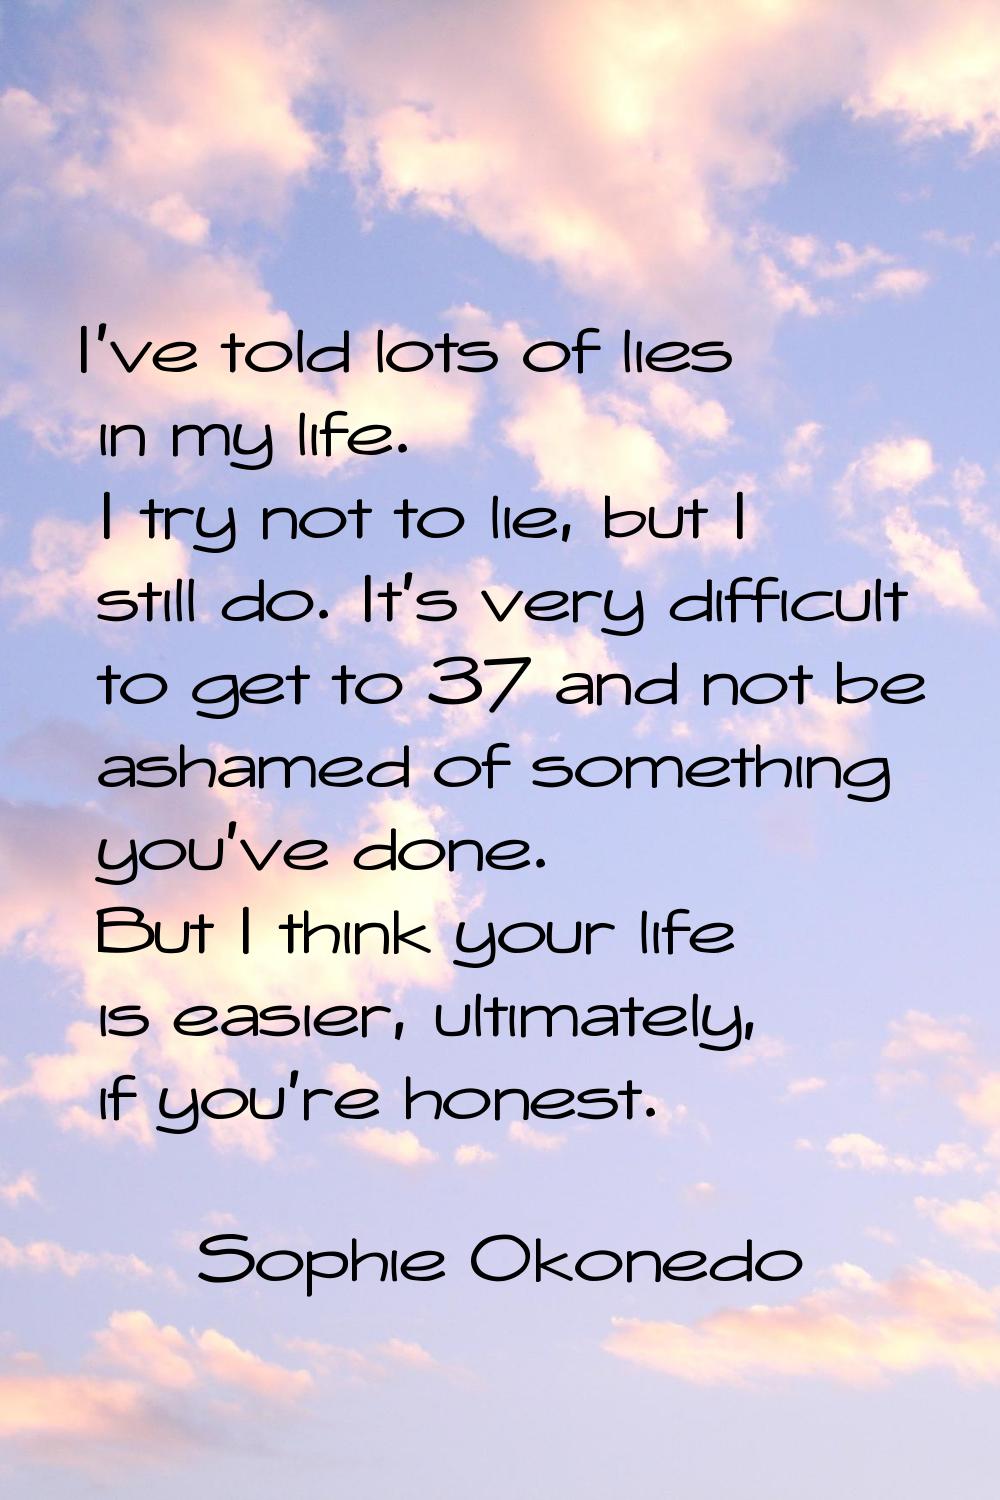 I've told lots of lies in my life. I try not to lie, but I still do. It's very difficult to get to 